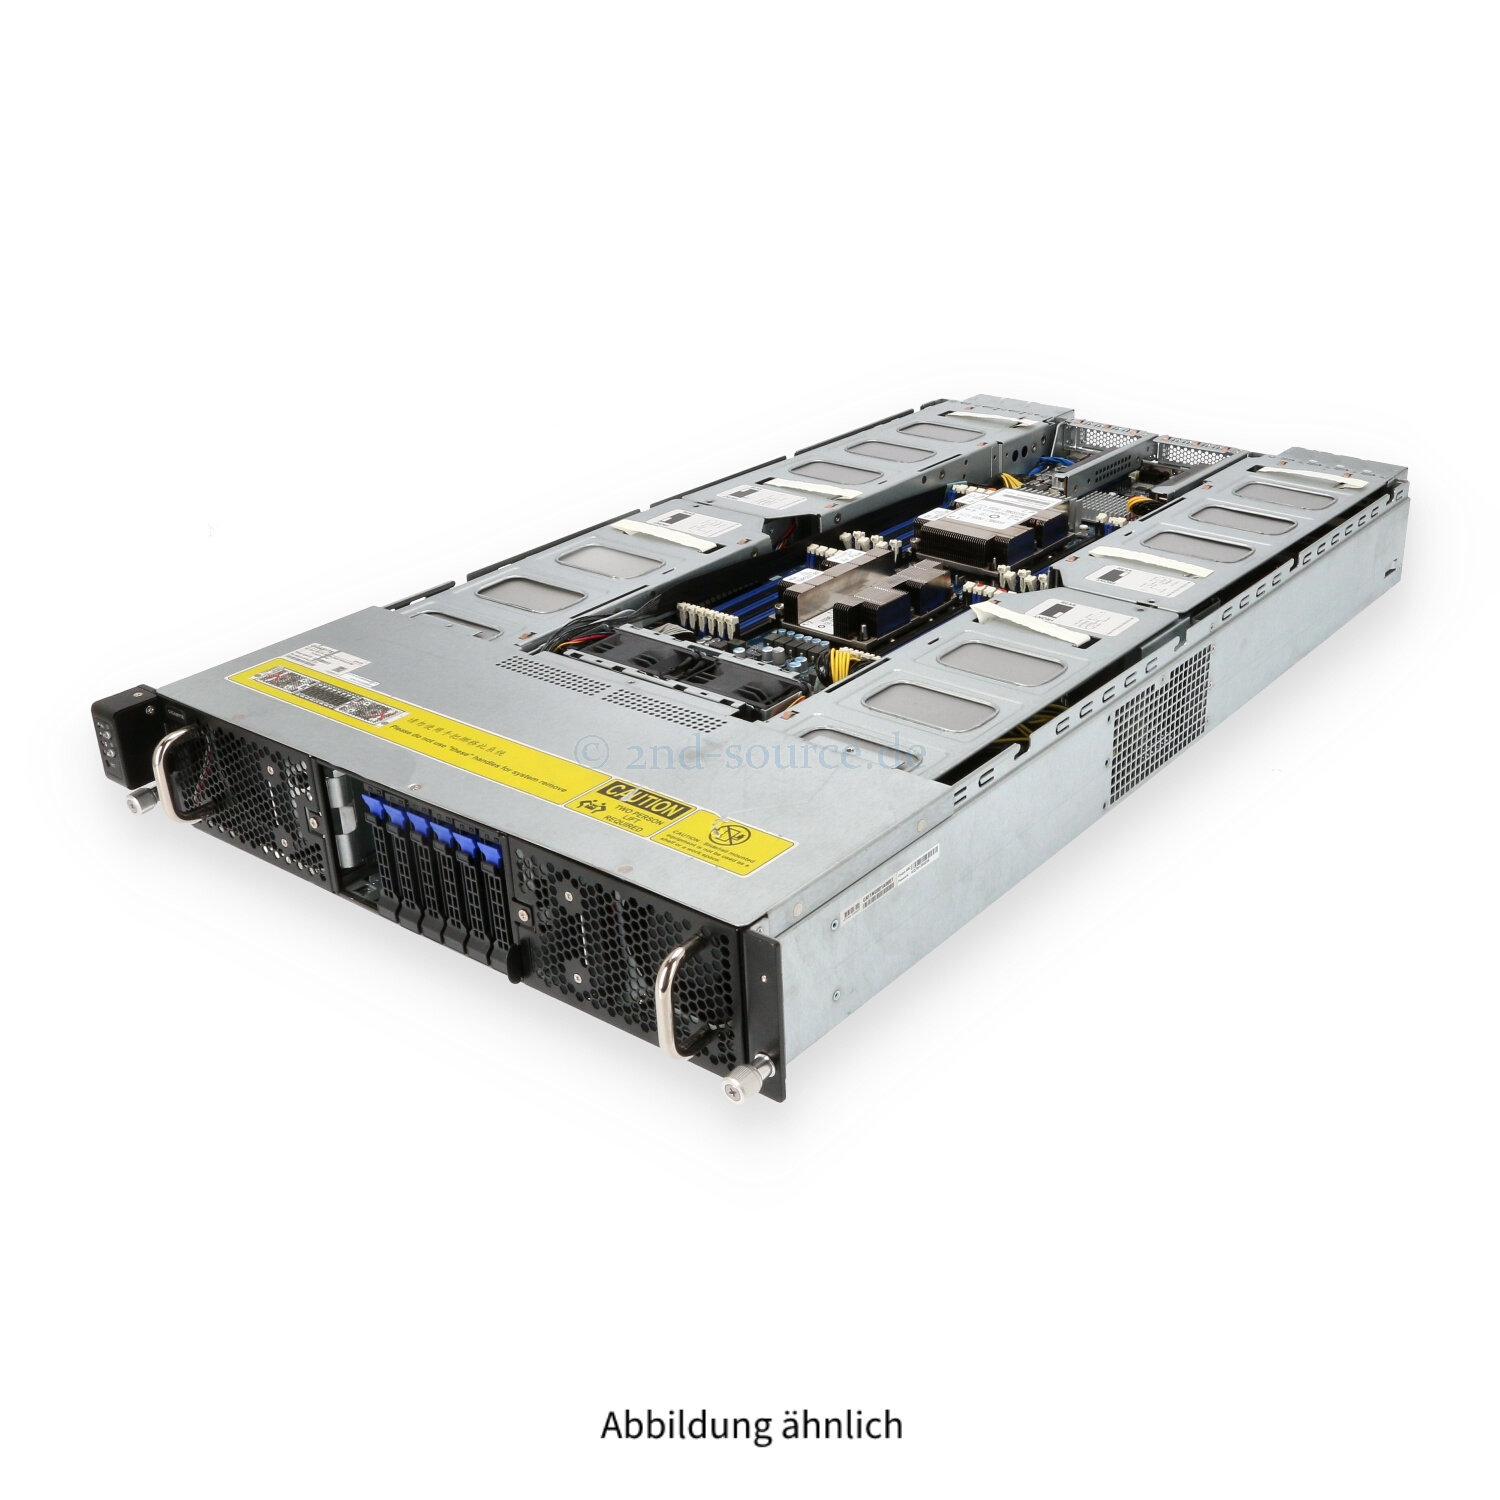 Gigabyte G291-281 8xSFF supports up to 8x double slot GPU cards 2x 10Gb/s Base-T Rack-Kit 6NG291281MR-00